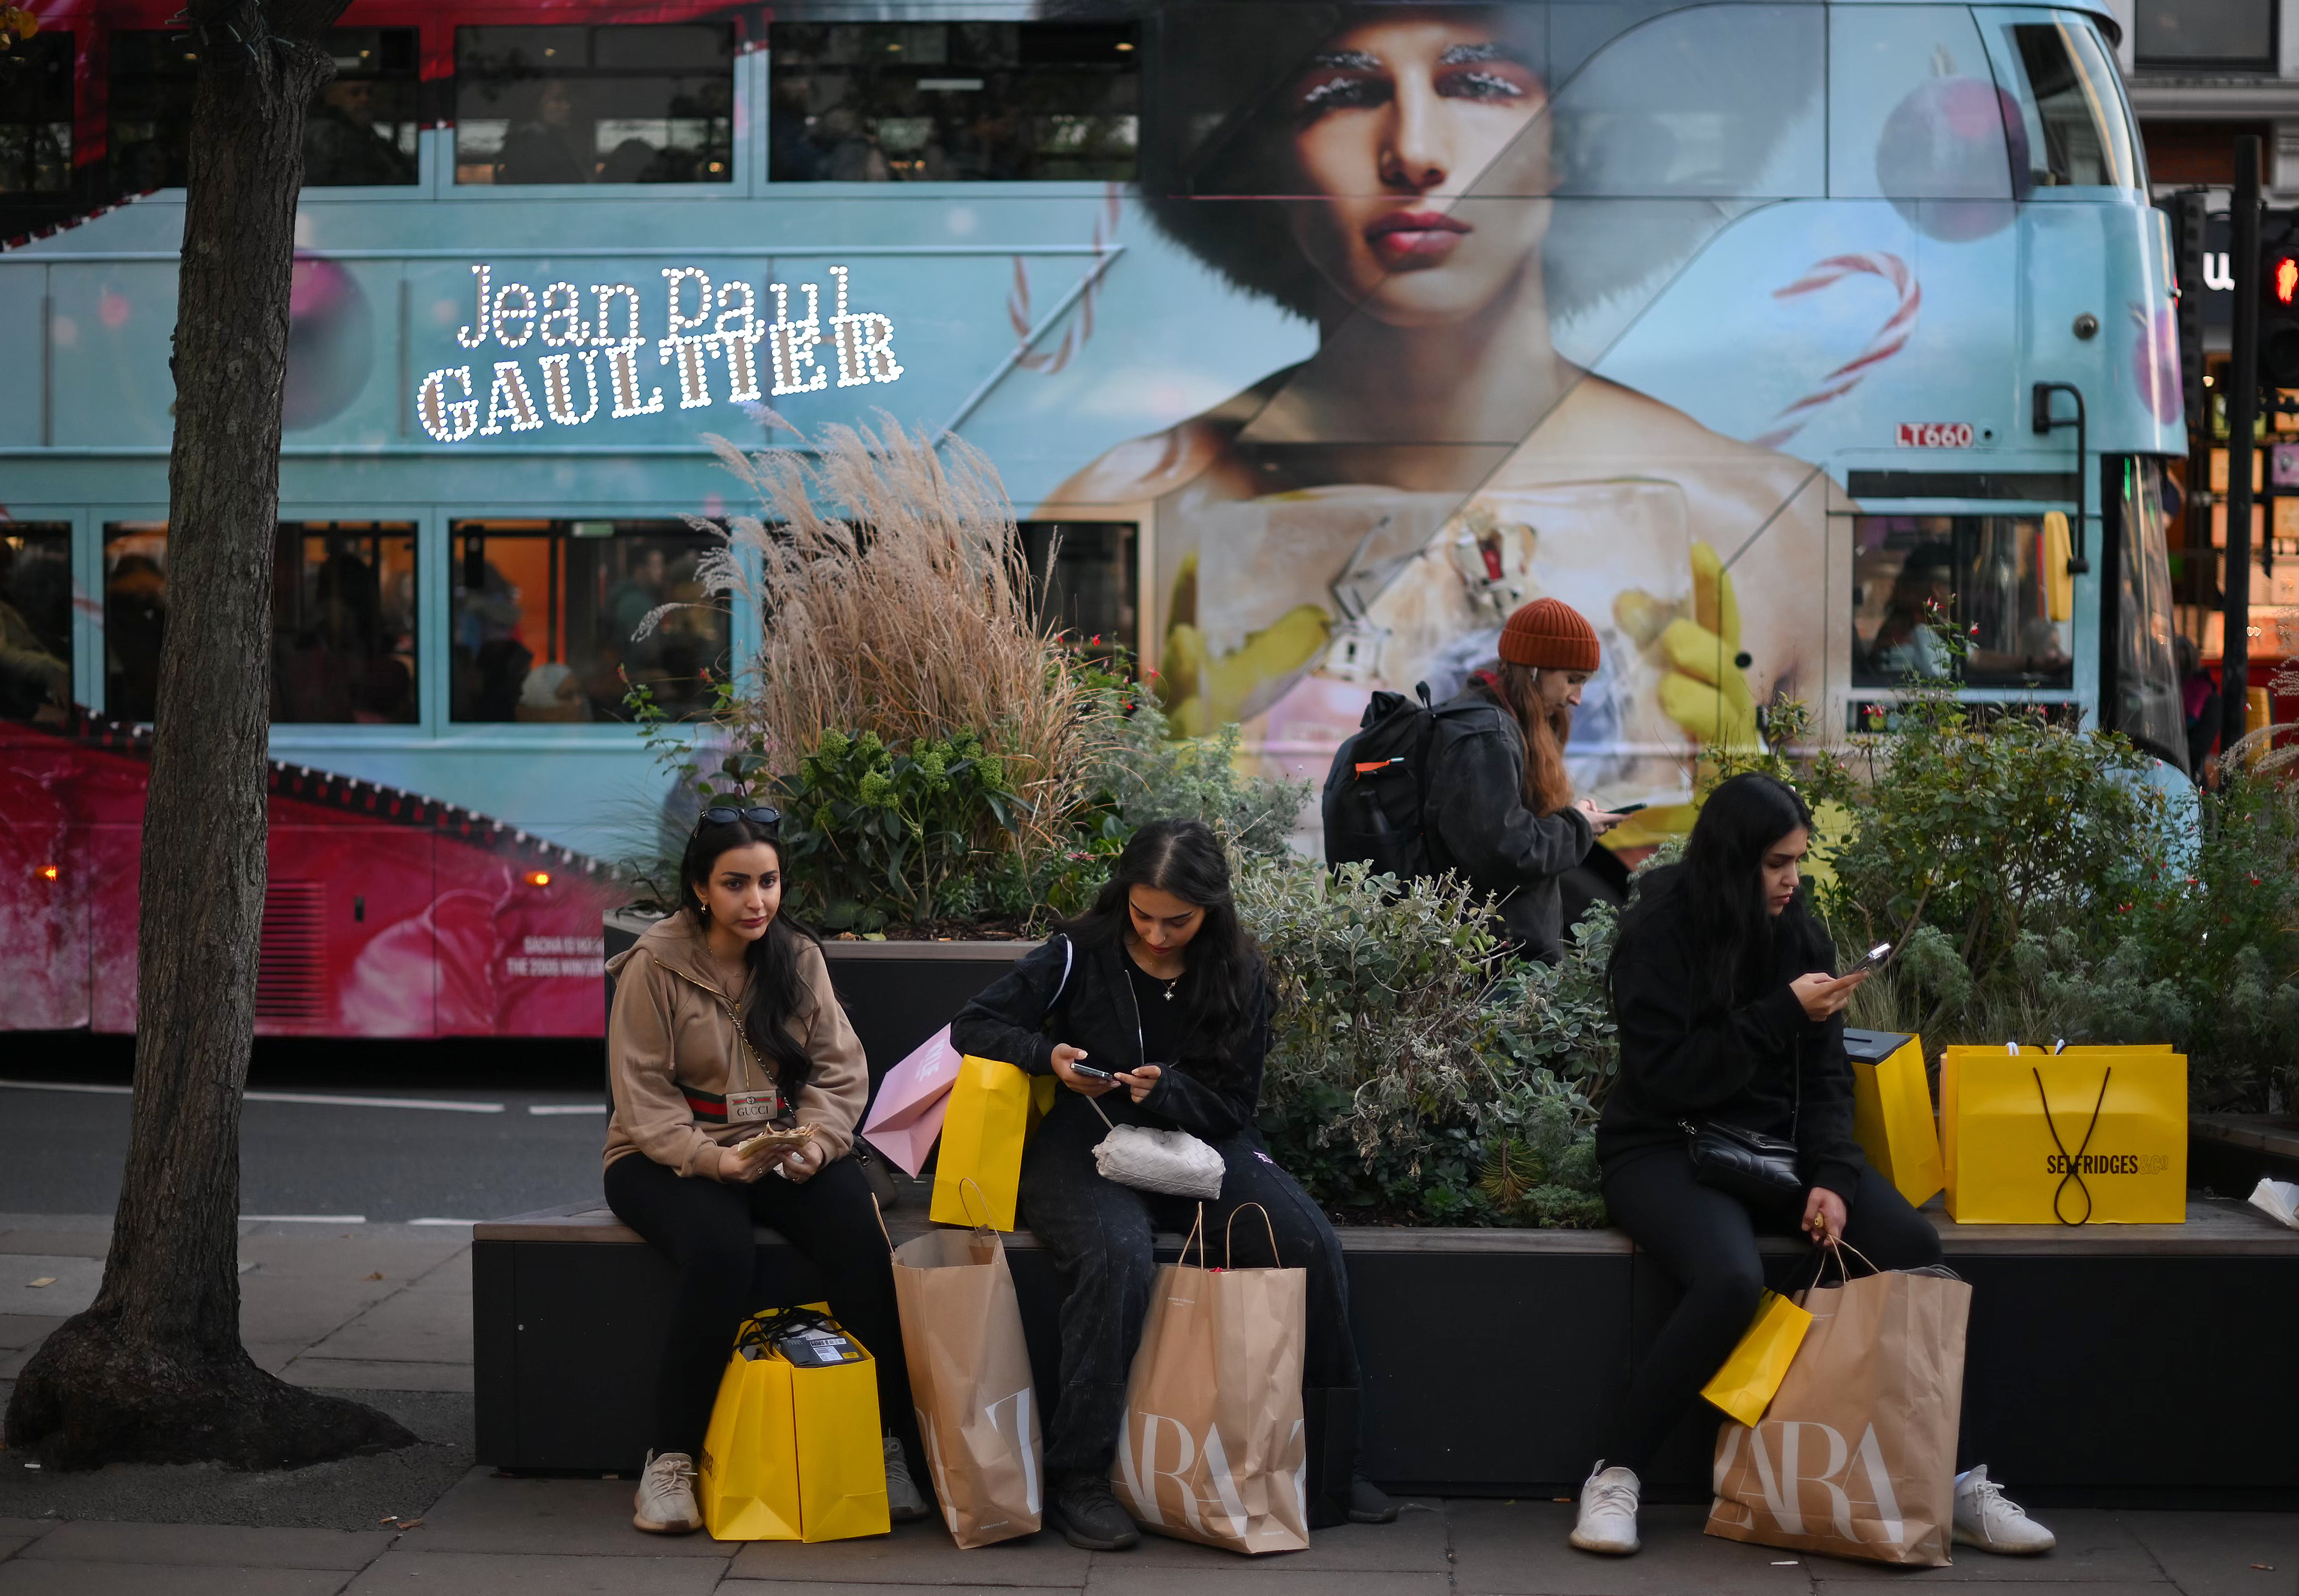 Shoppers sit with their purchases in Selfridges and Zara-branded shopping bags on Black Friday in central London on November 25, 2022. (Photo by Daniel LEAL / AFP)